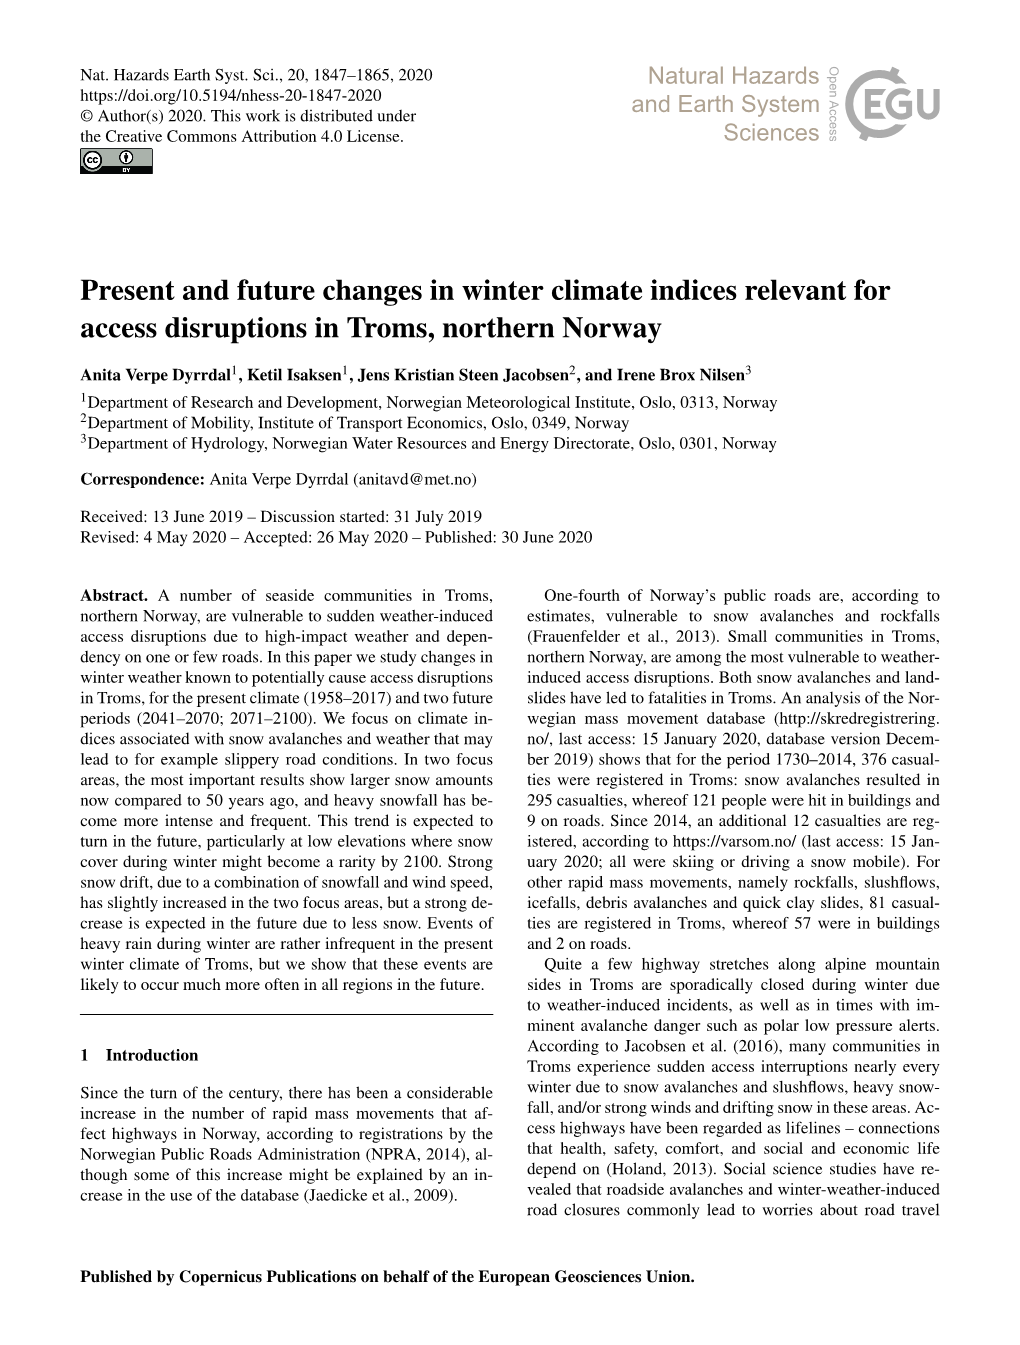 Present and Future Changes in Winter Climate Indices Relevant for Access Disruptions in Troms, Northern Norway